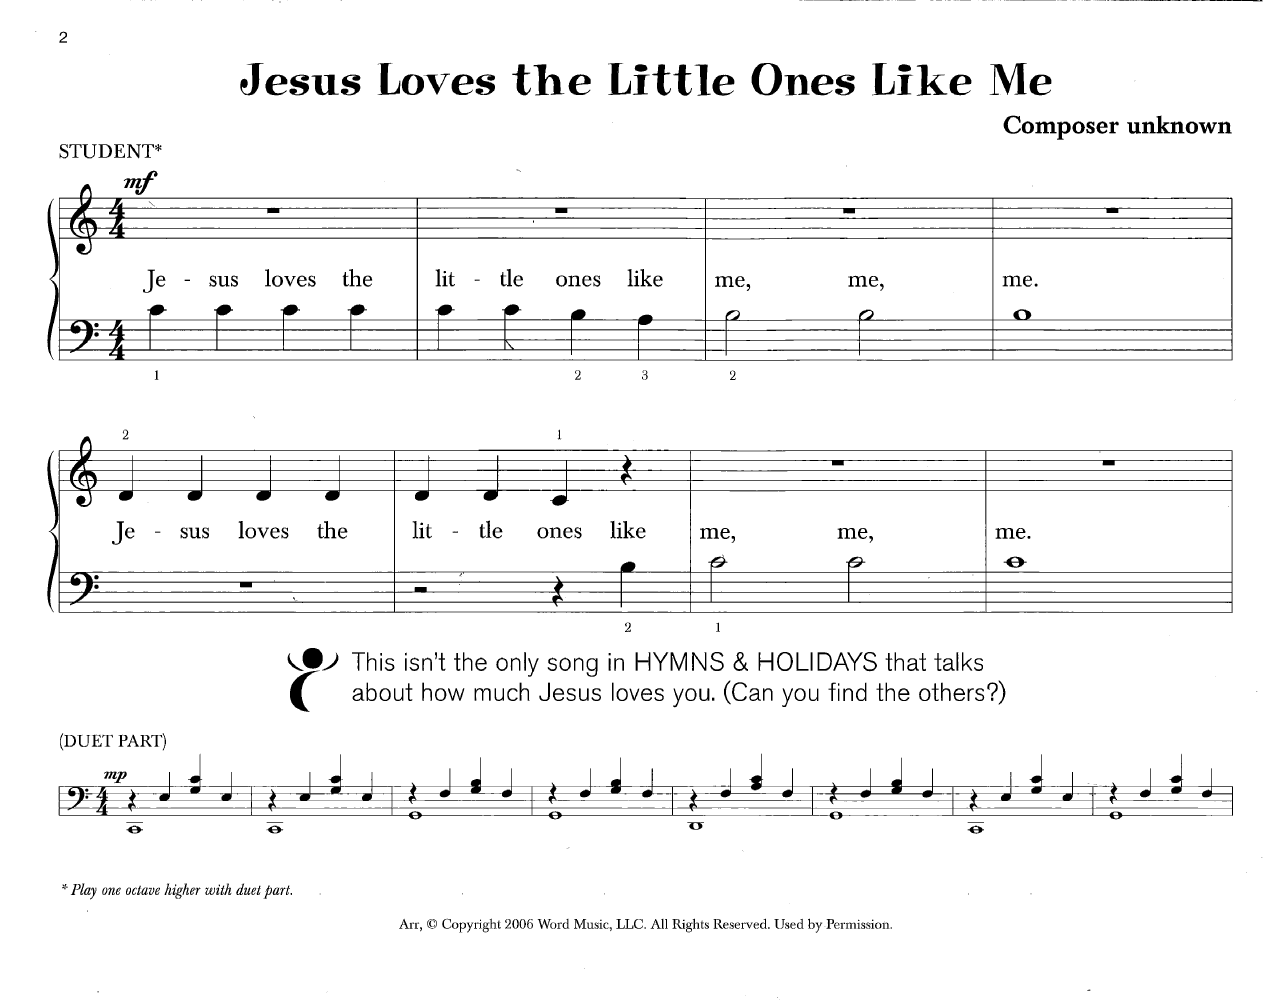 Music In Me #1 Hymns And Holidays